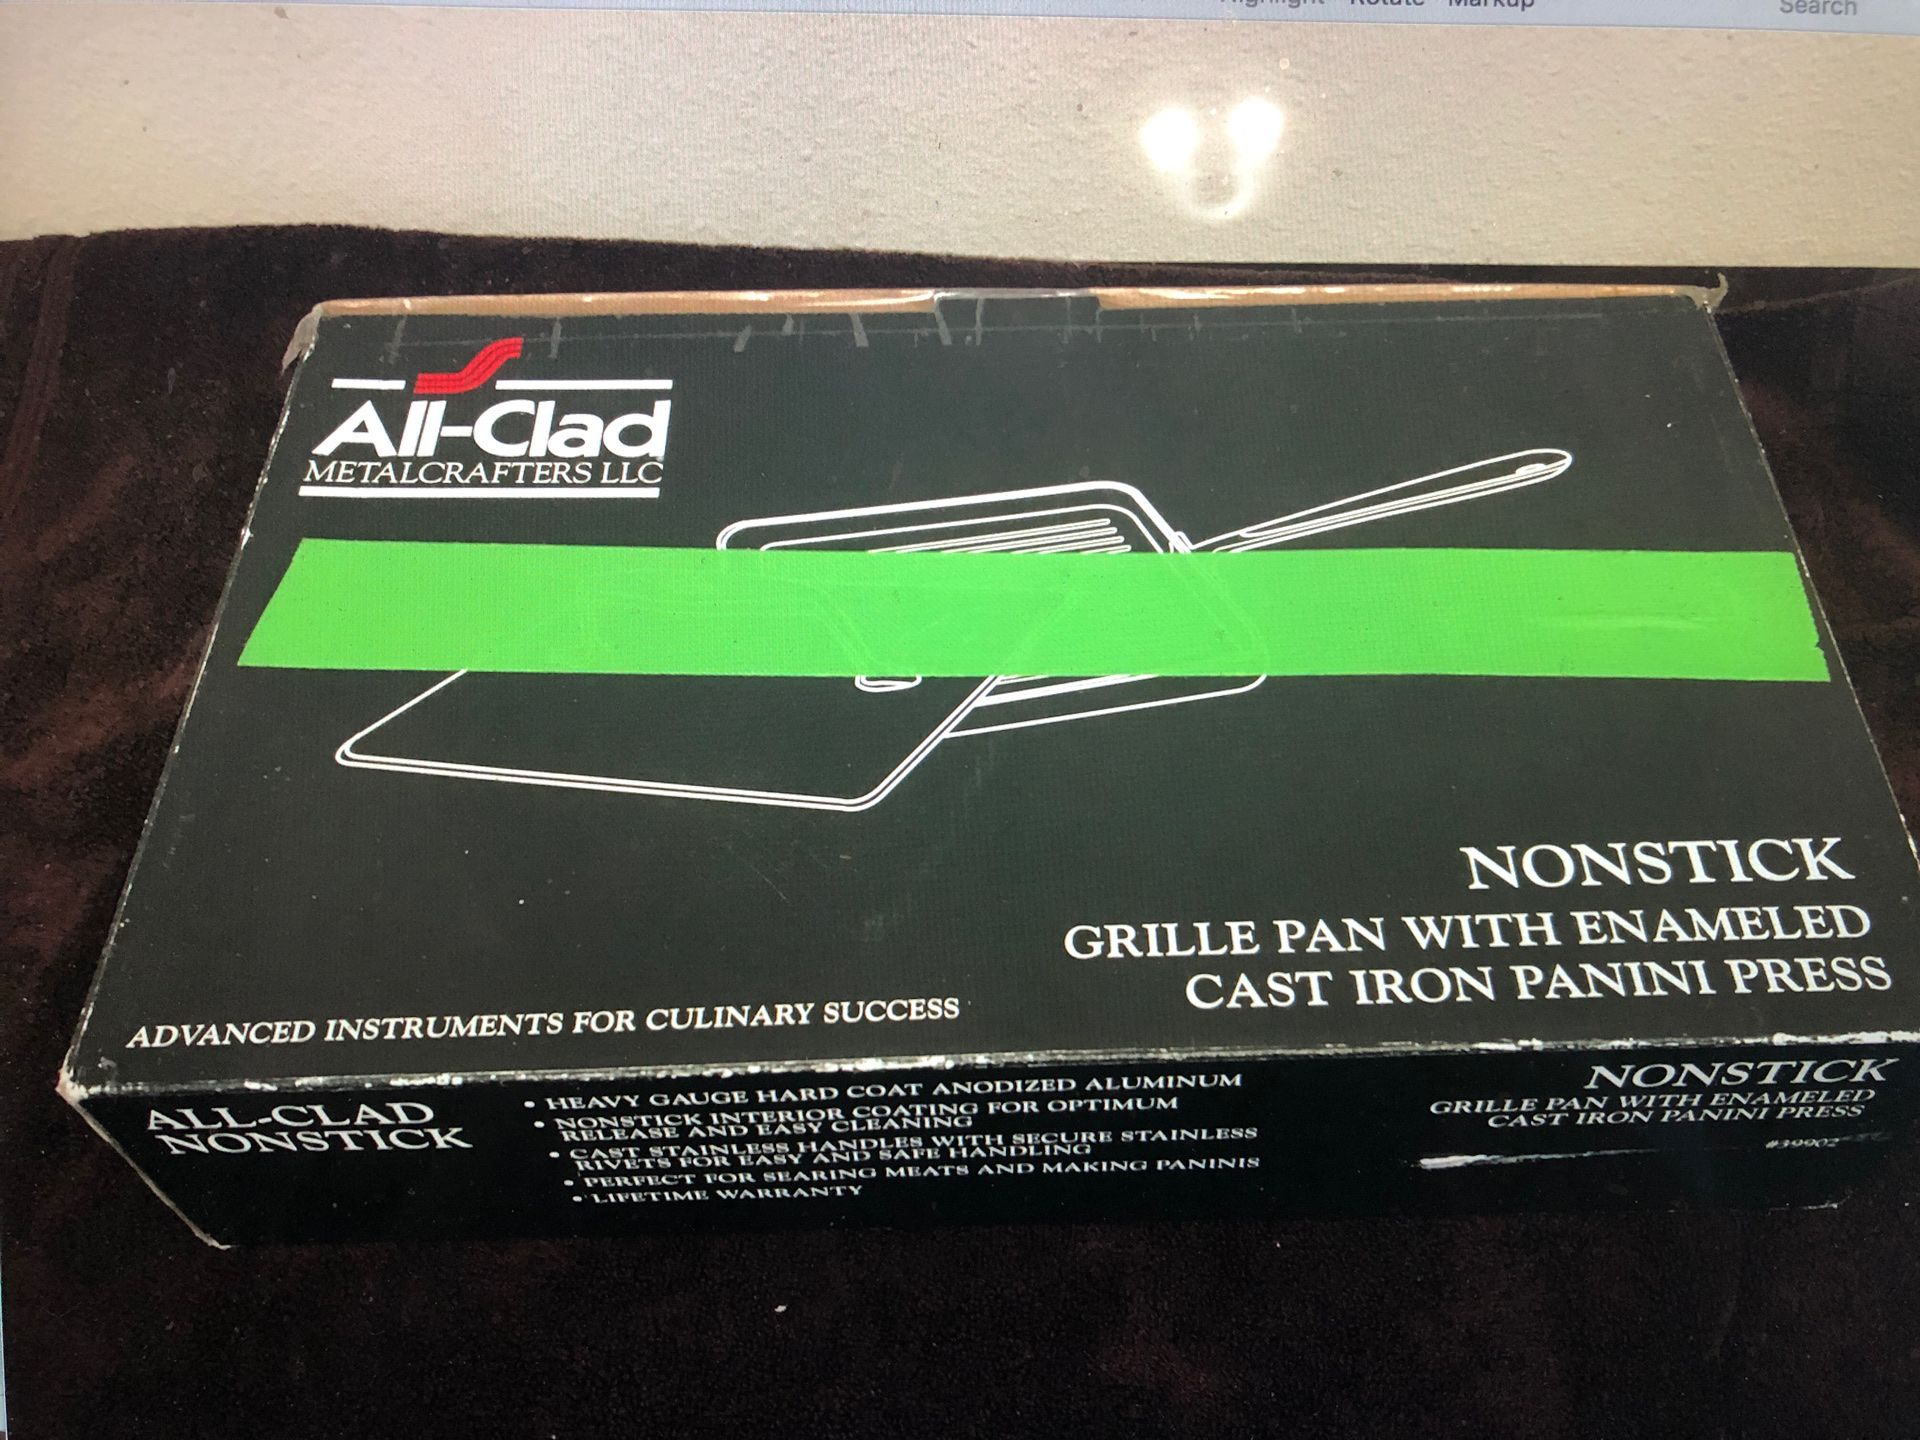 All-Clad cast iron Grille Pan w/Panini Press